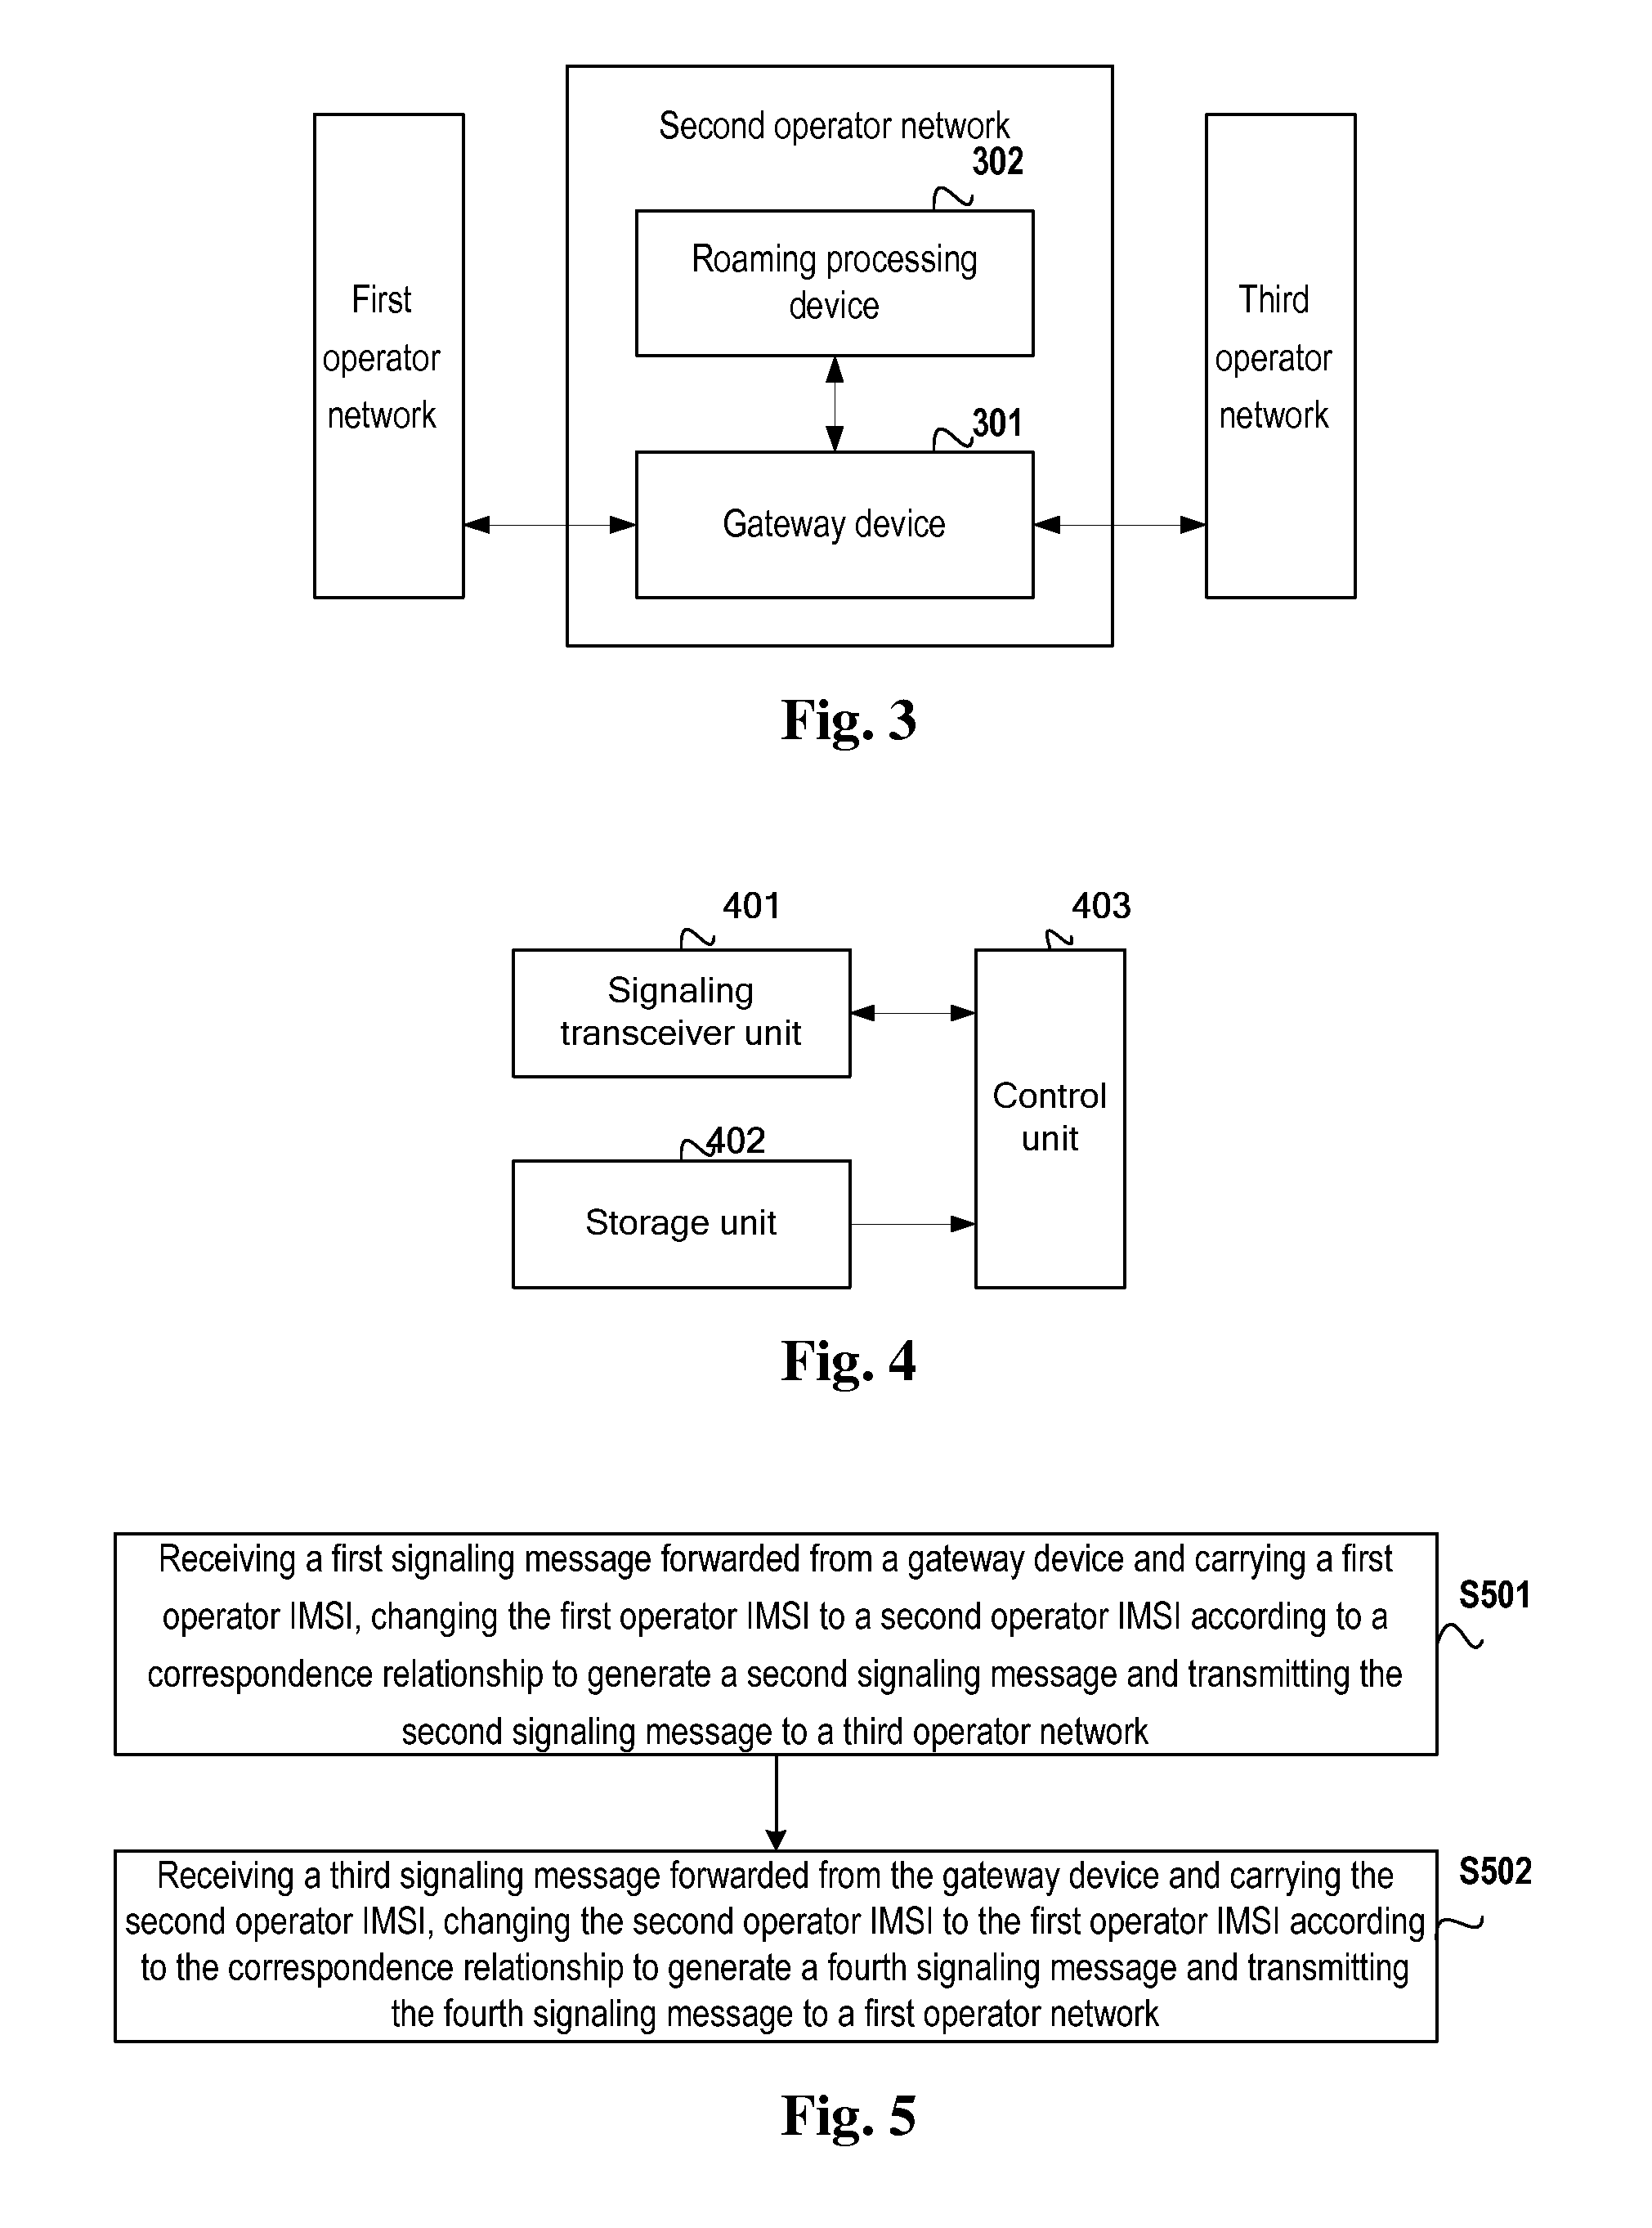 Method, roaming processing device and communication system for implementing international roaming